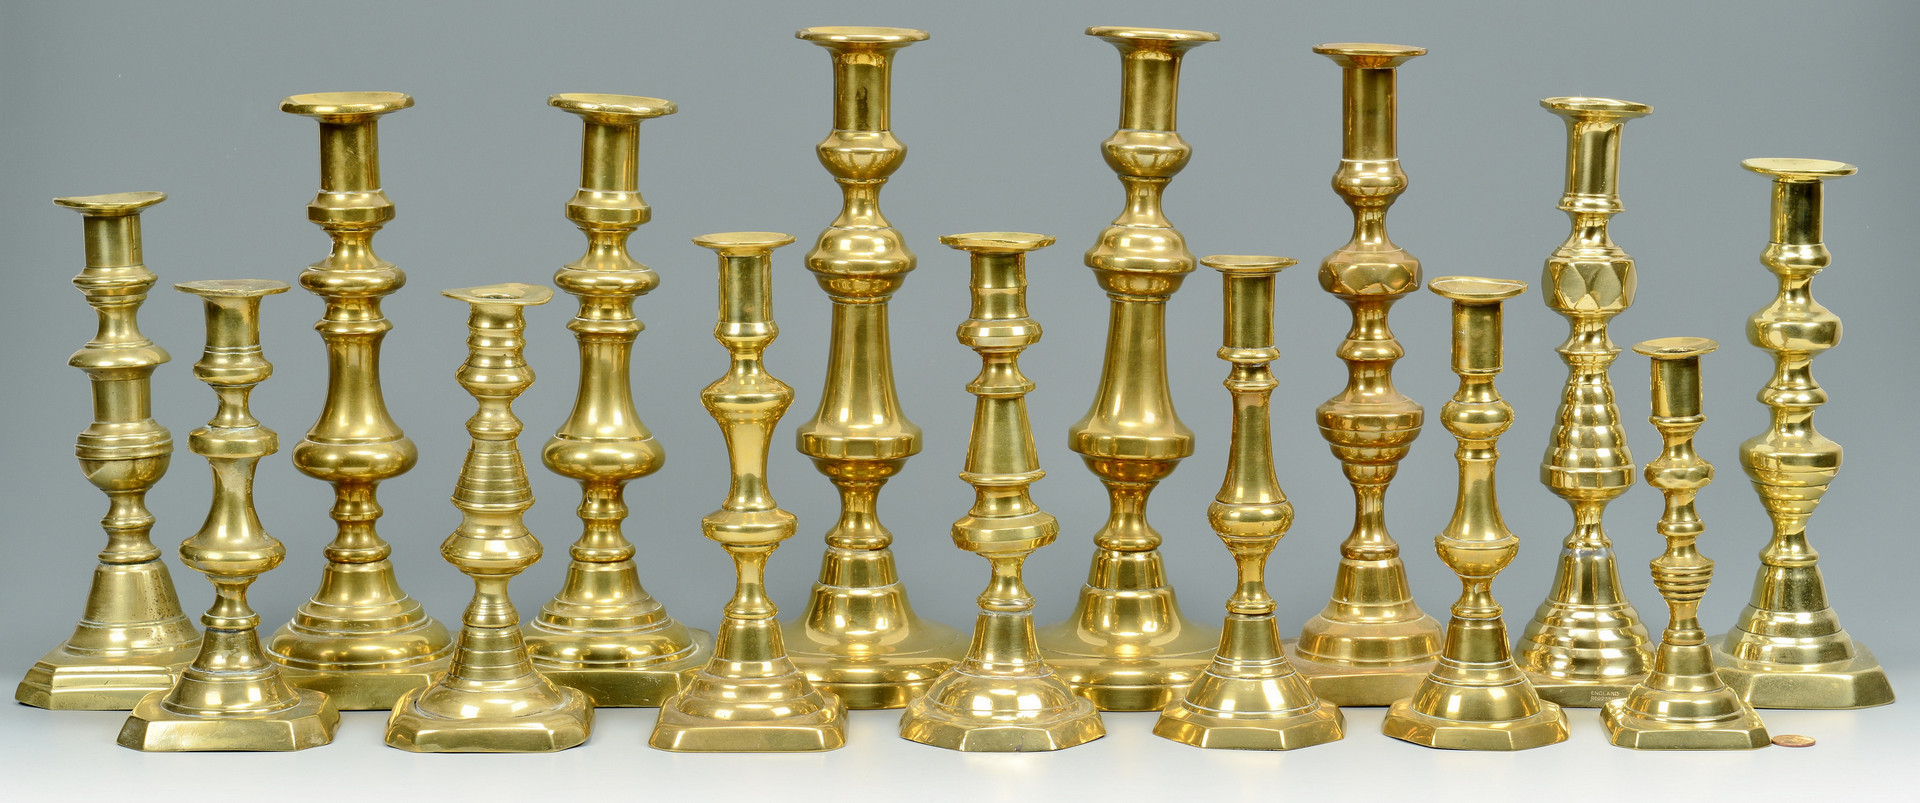 Lot 705: Grouping of Brass Candlesticks, 15 total